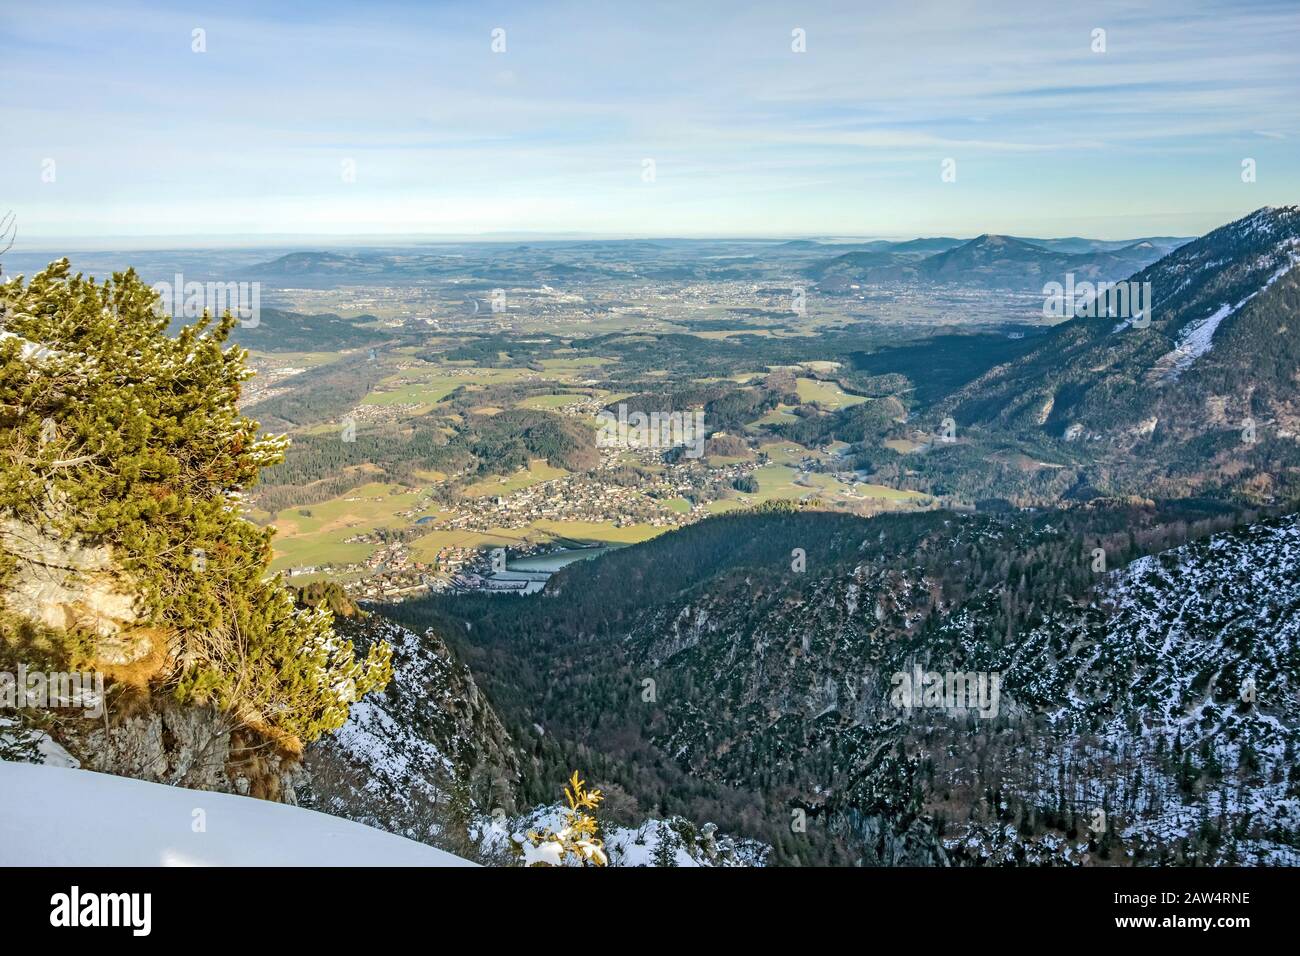 City of Bad Reichenhall, Germany - view from mountain Predigtstuhl Stock Photo